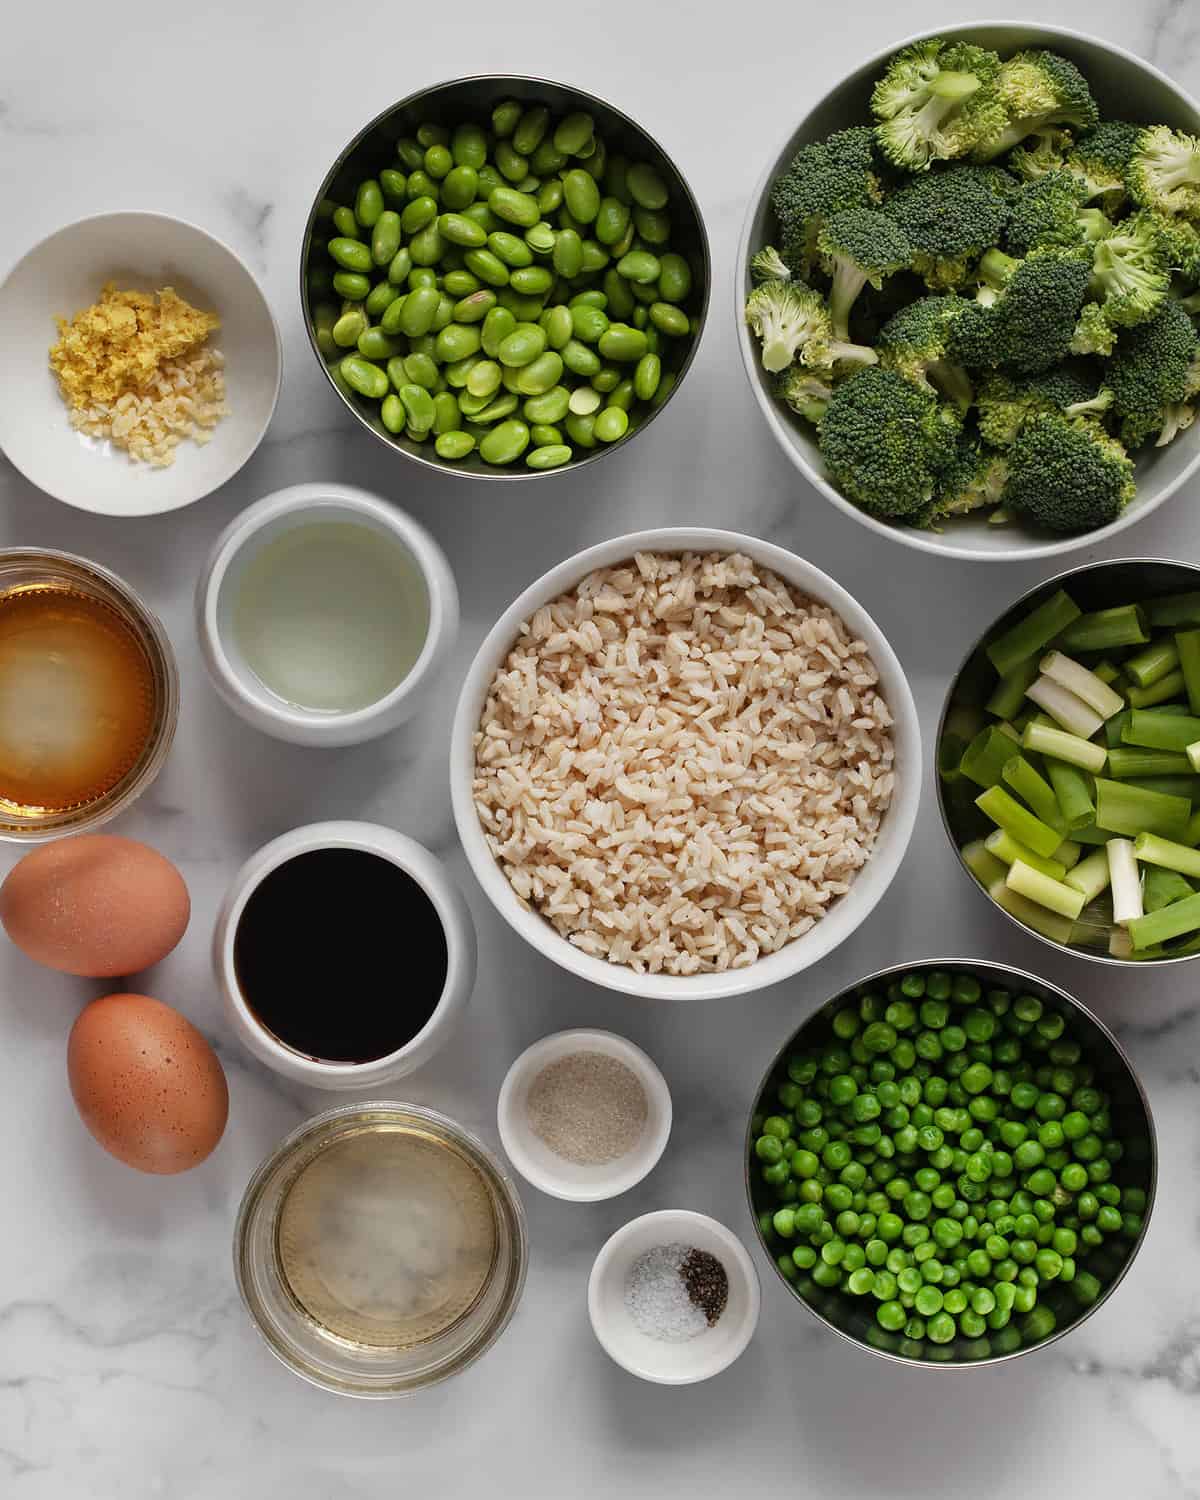 Ingredients including broccoli, peas, edamame, scallions, rice, eggs, oil, rice vinegar, ginger, garlic and soy sauce.